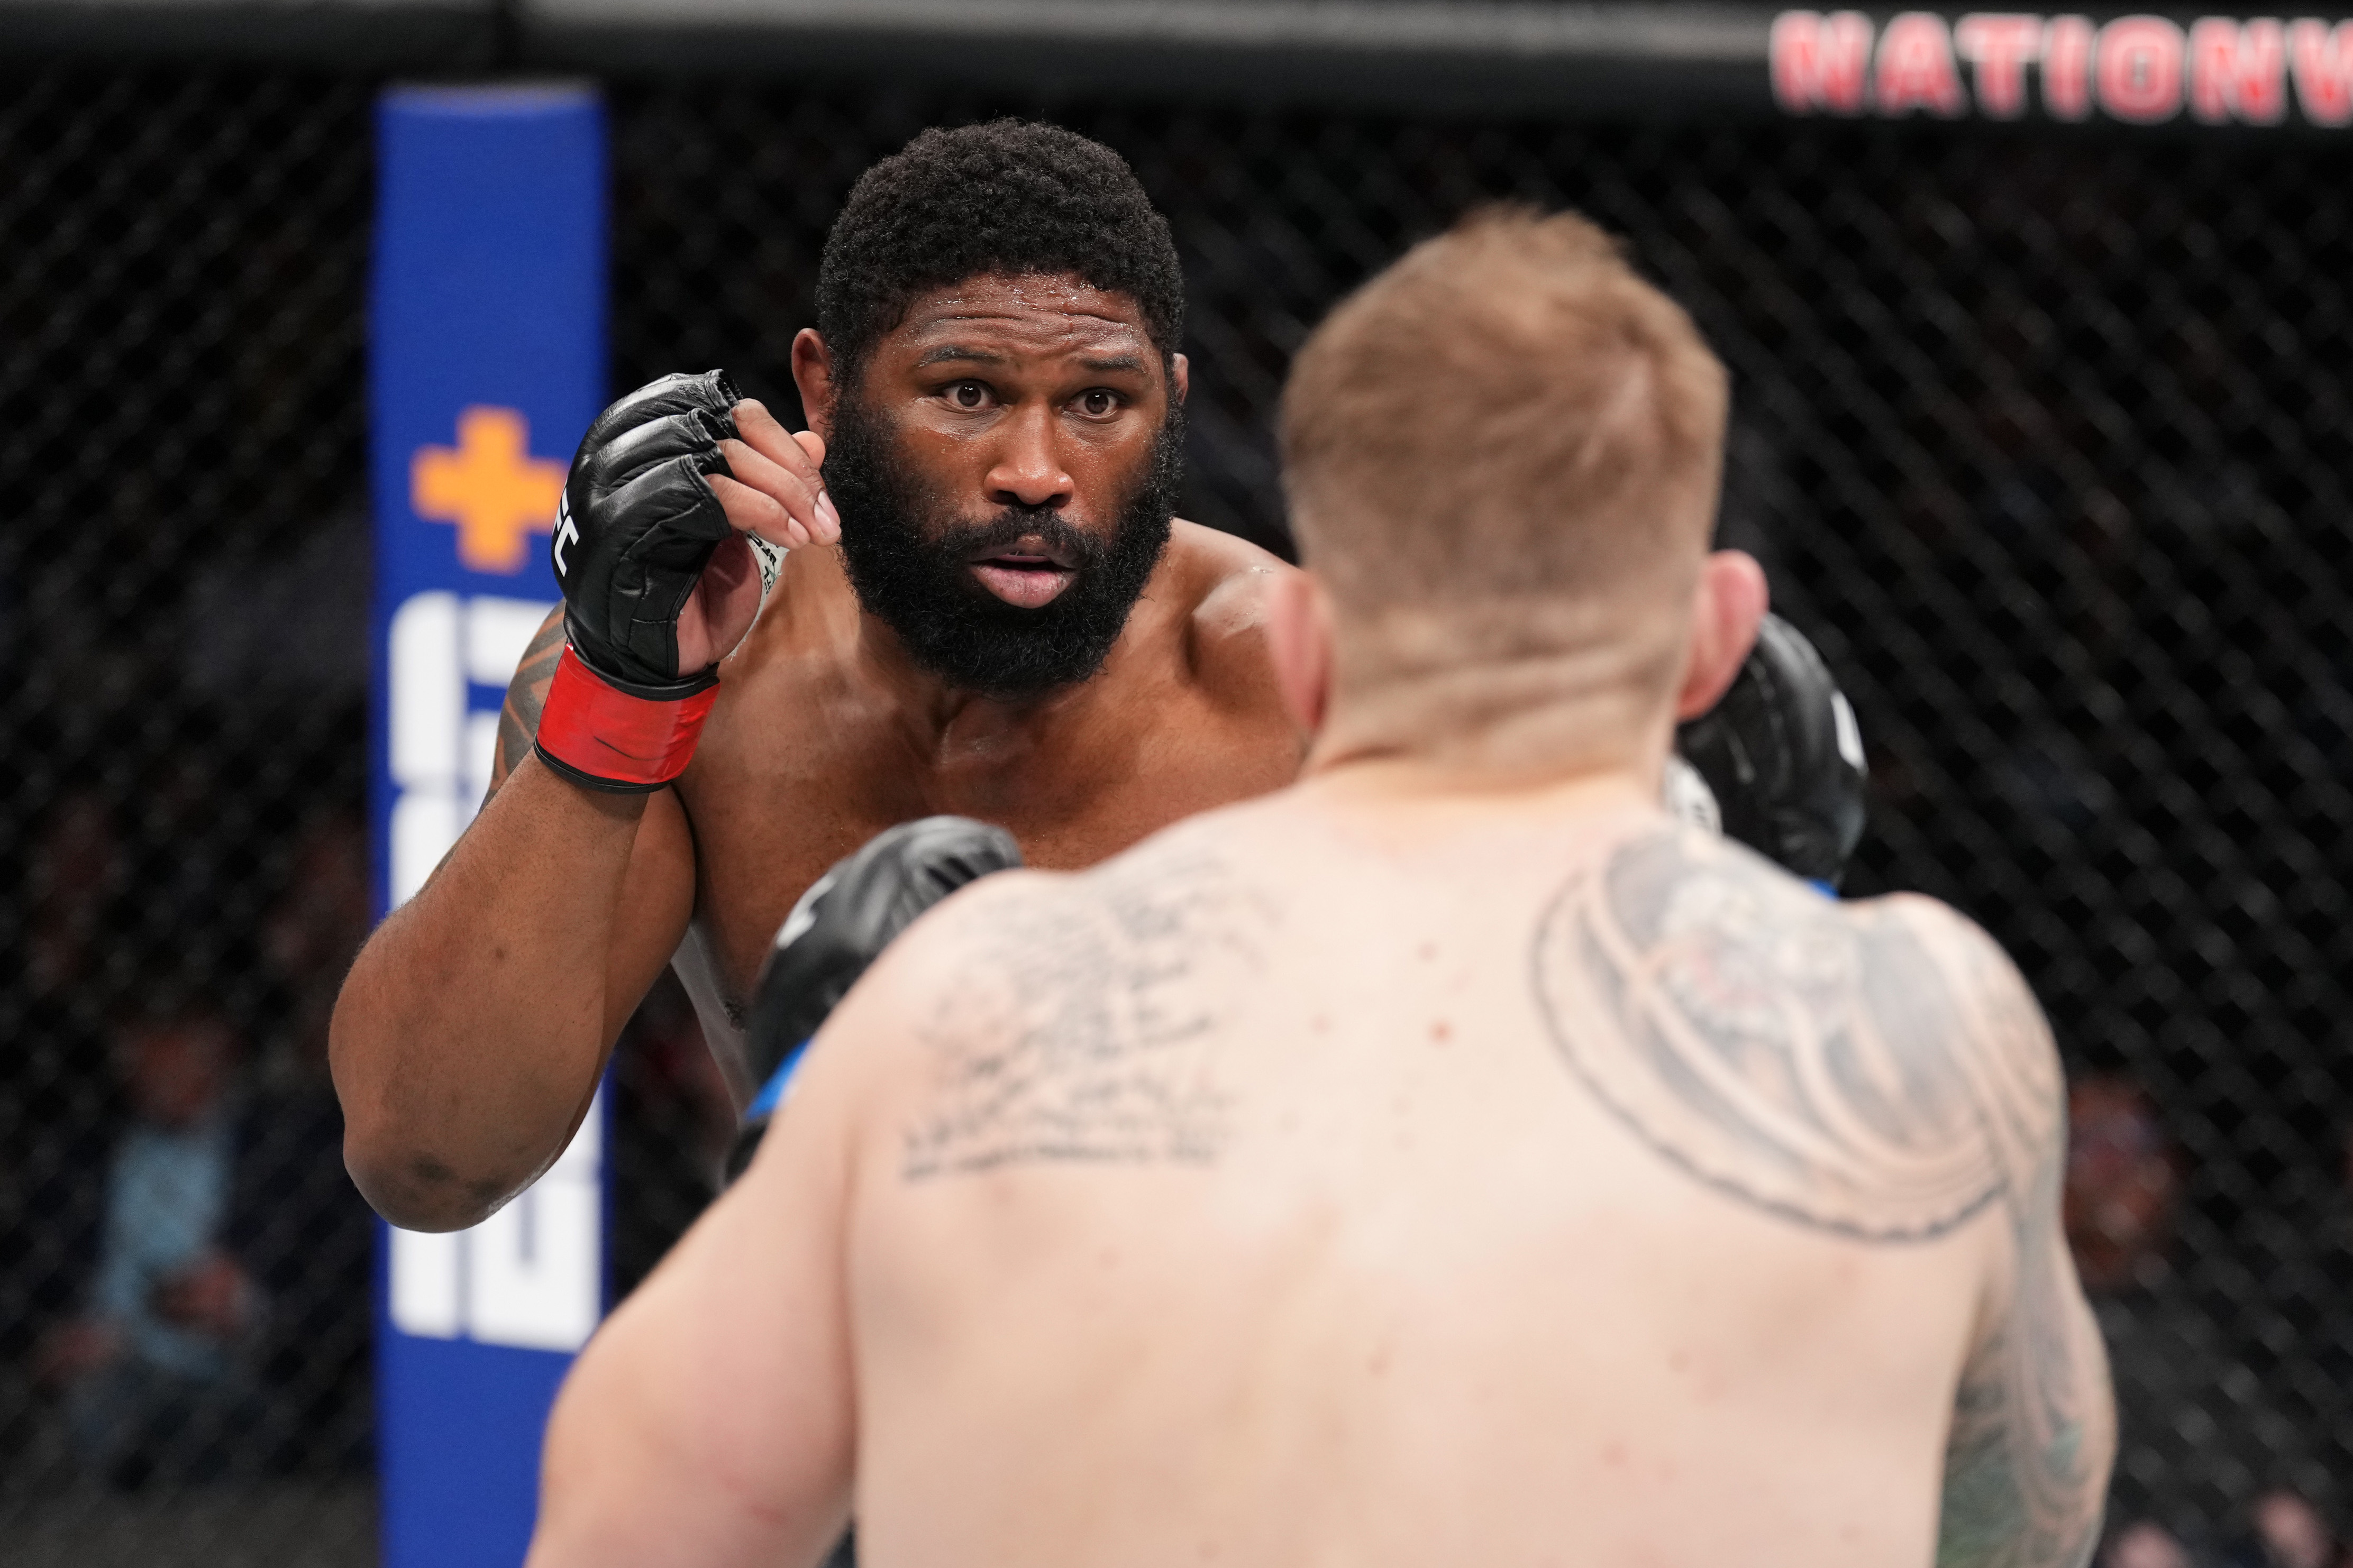 Curtis Blaydes battles Chris Daukaus in a heavyweight fight during the UFC Fight Night event at Nationwide Arena on March 26, 2022 in Columbus, Ohio.